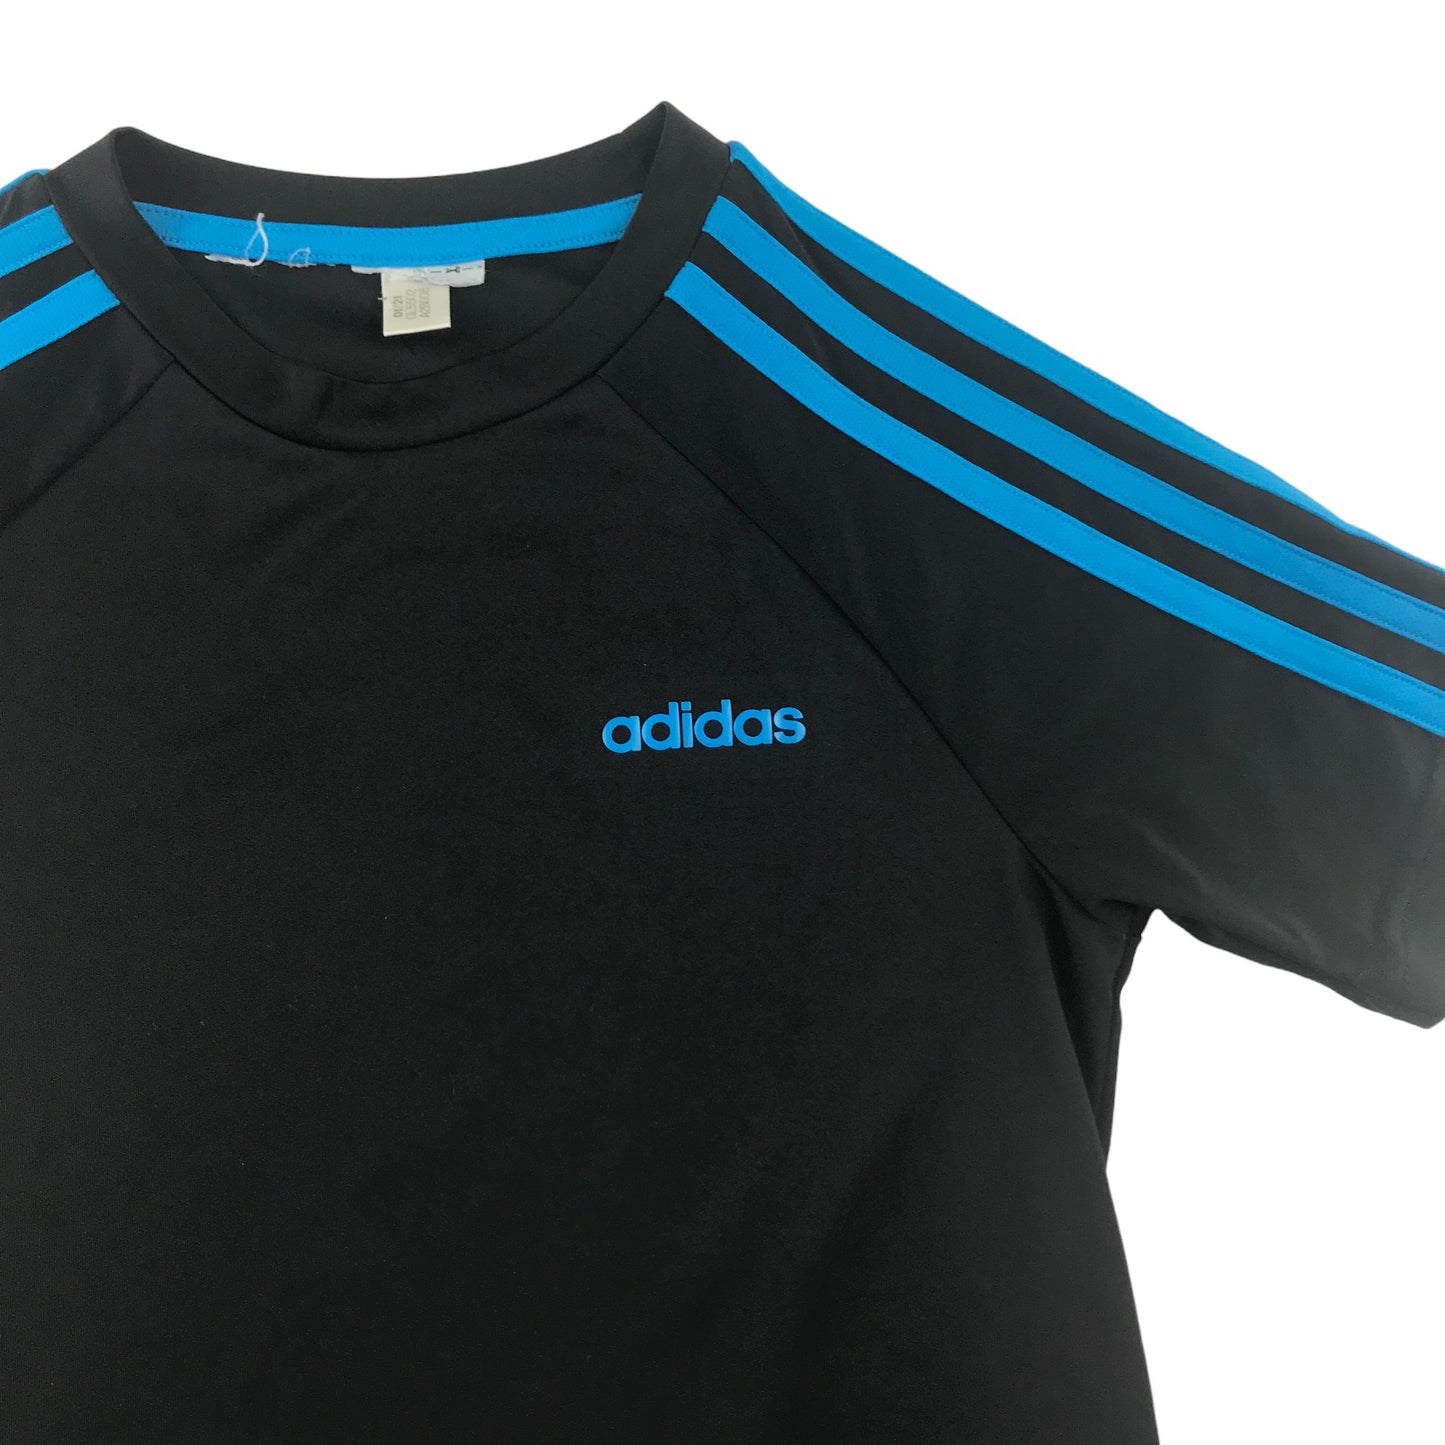 Adidas Sports Top Age 7-8 Black with Blue 3 Stripes Detail